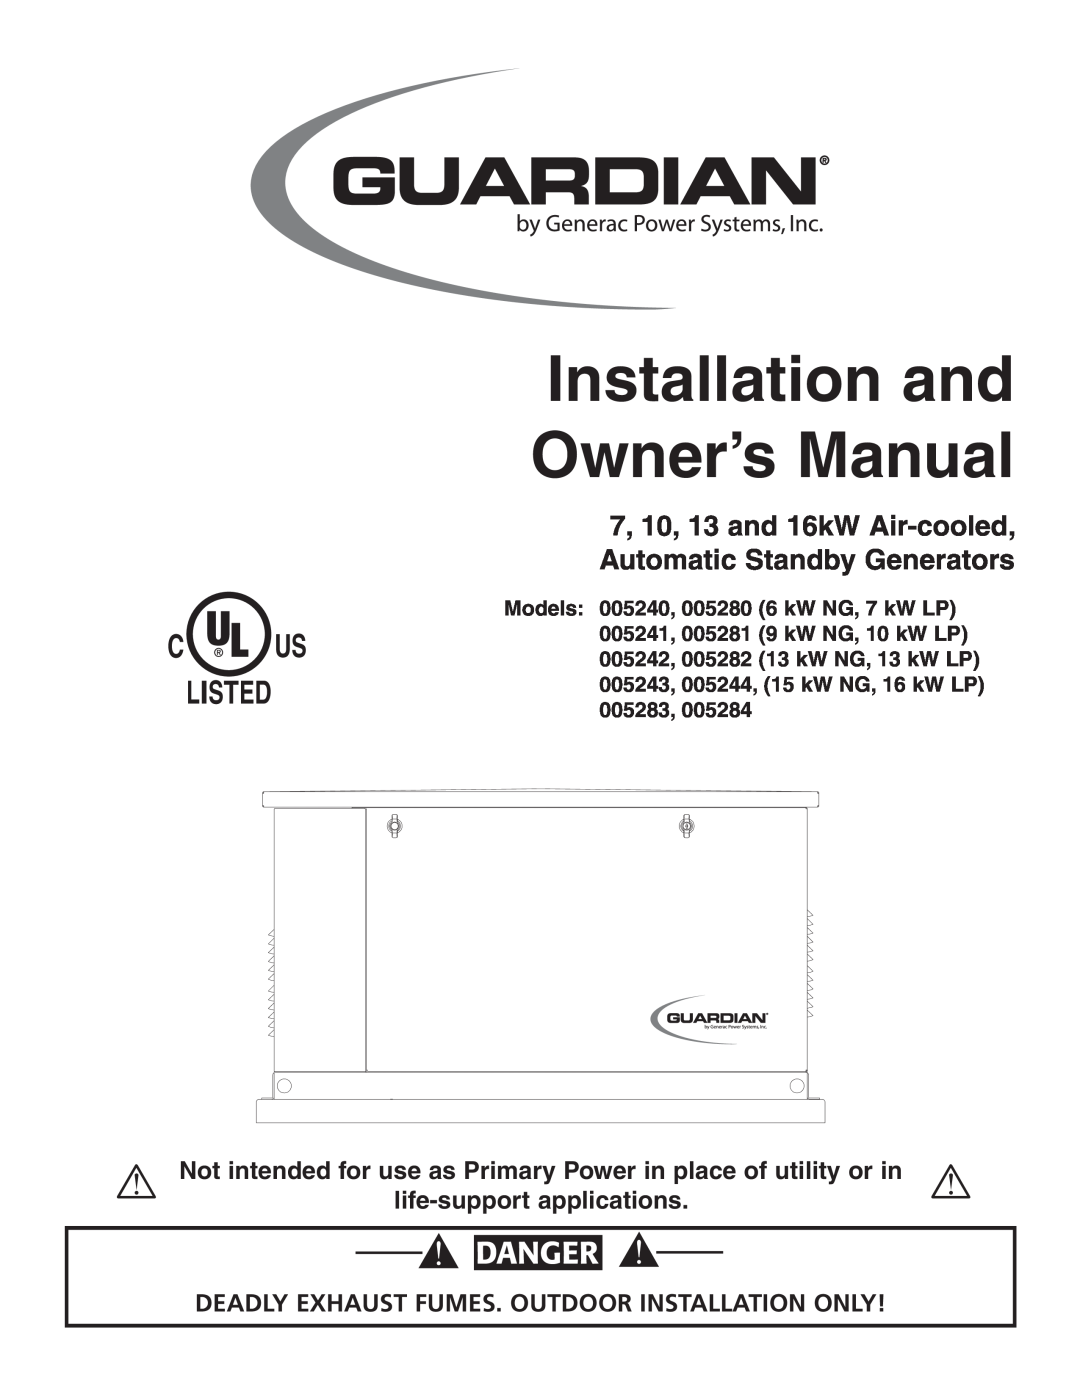 Guardian Technologies 005282 owner manual C Us Listed, Danger, Deadly Exhaust Fumes. Outdoor Installation Only, Generac R 